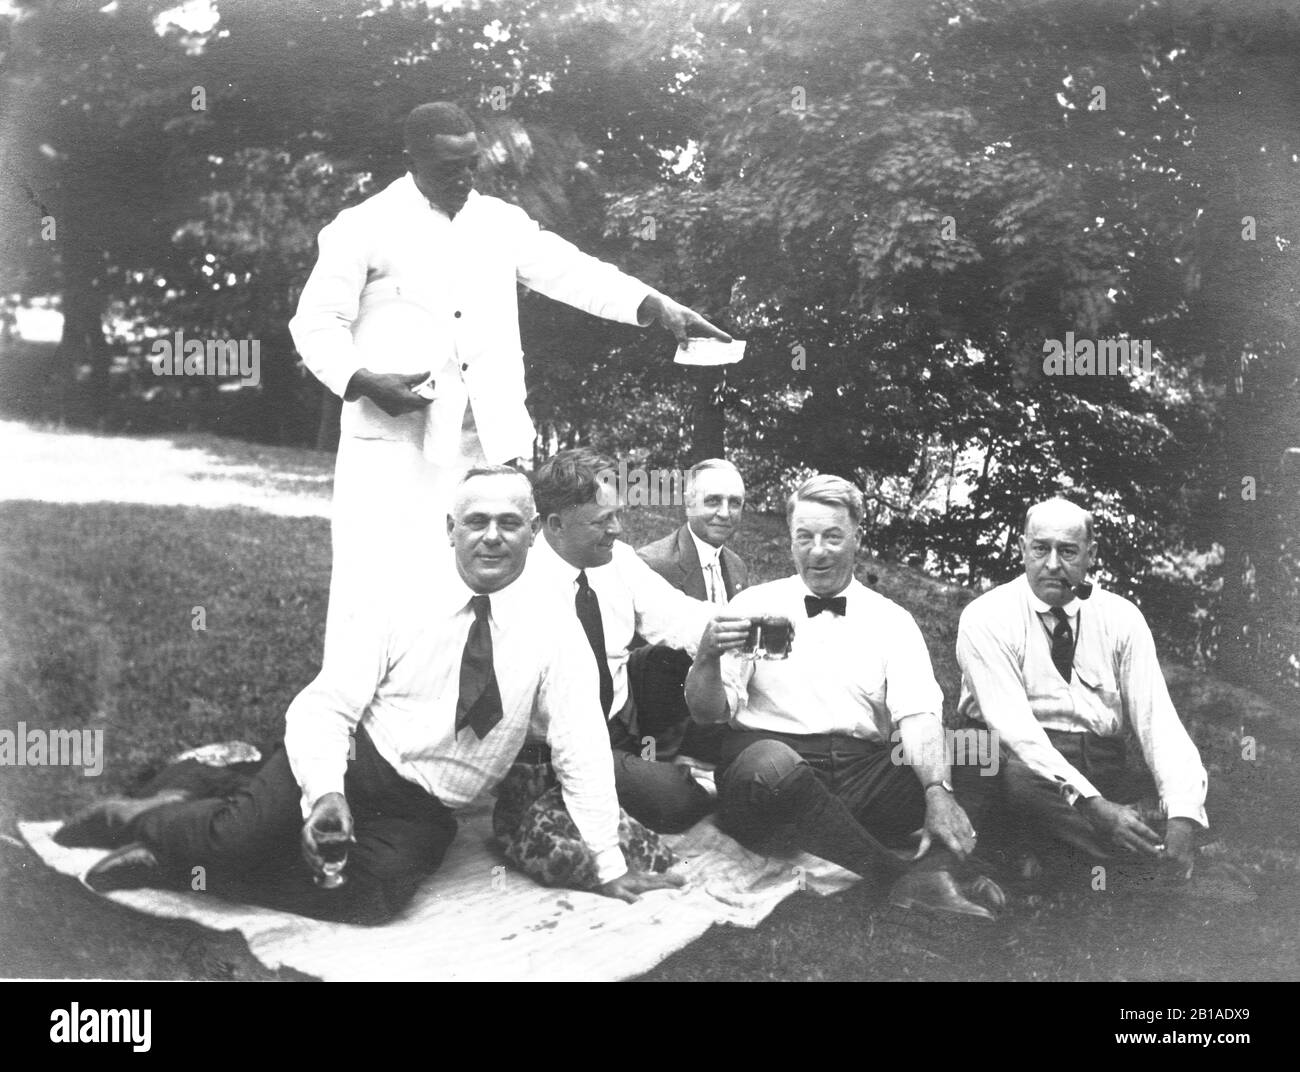 One African American waiter/ server holds up a cash tip he received from 5 White businessmen sitting on a picnic blanket. My guess is that the Whites told him to display the cash for the photographer, to show how generous they were. I can't see what amount the cash tip is. The businessmen are enjoying beer, having a good time.  No known location or people.   To see my other African American-related vintage images, Search:  Prestor  vintage  African Stock Photo